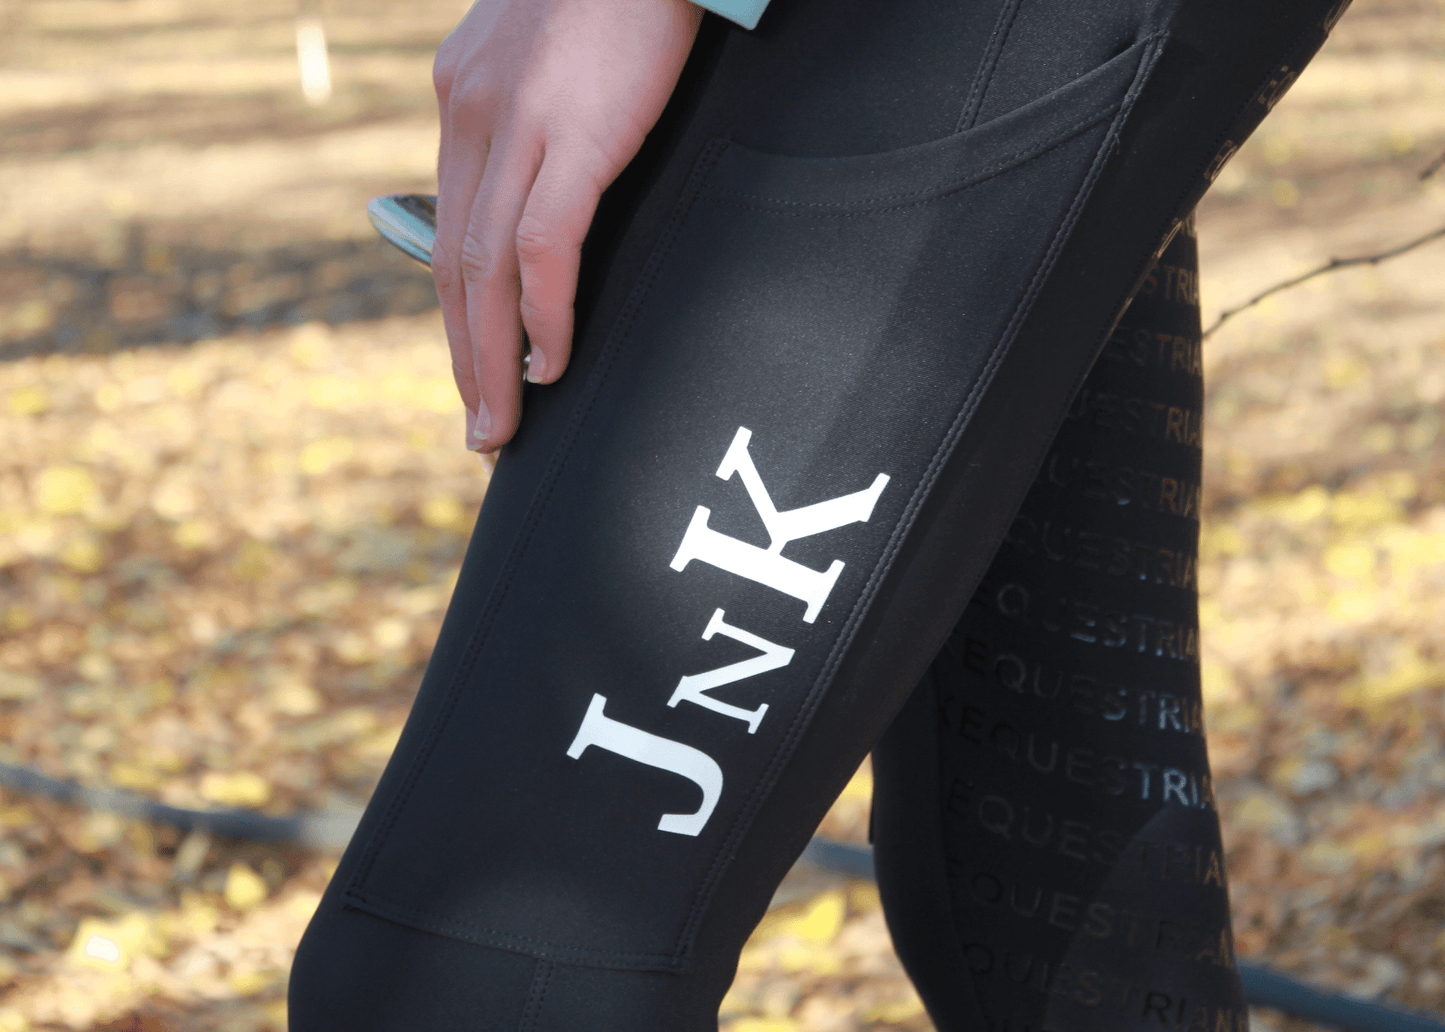 Close-up of black horse riding tights with white logo on thigh.